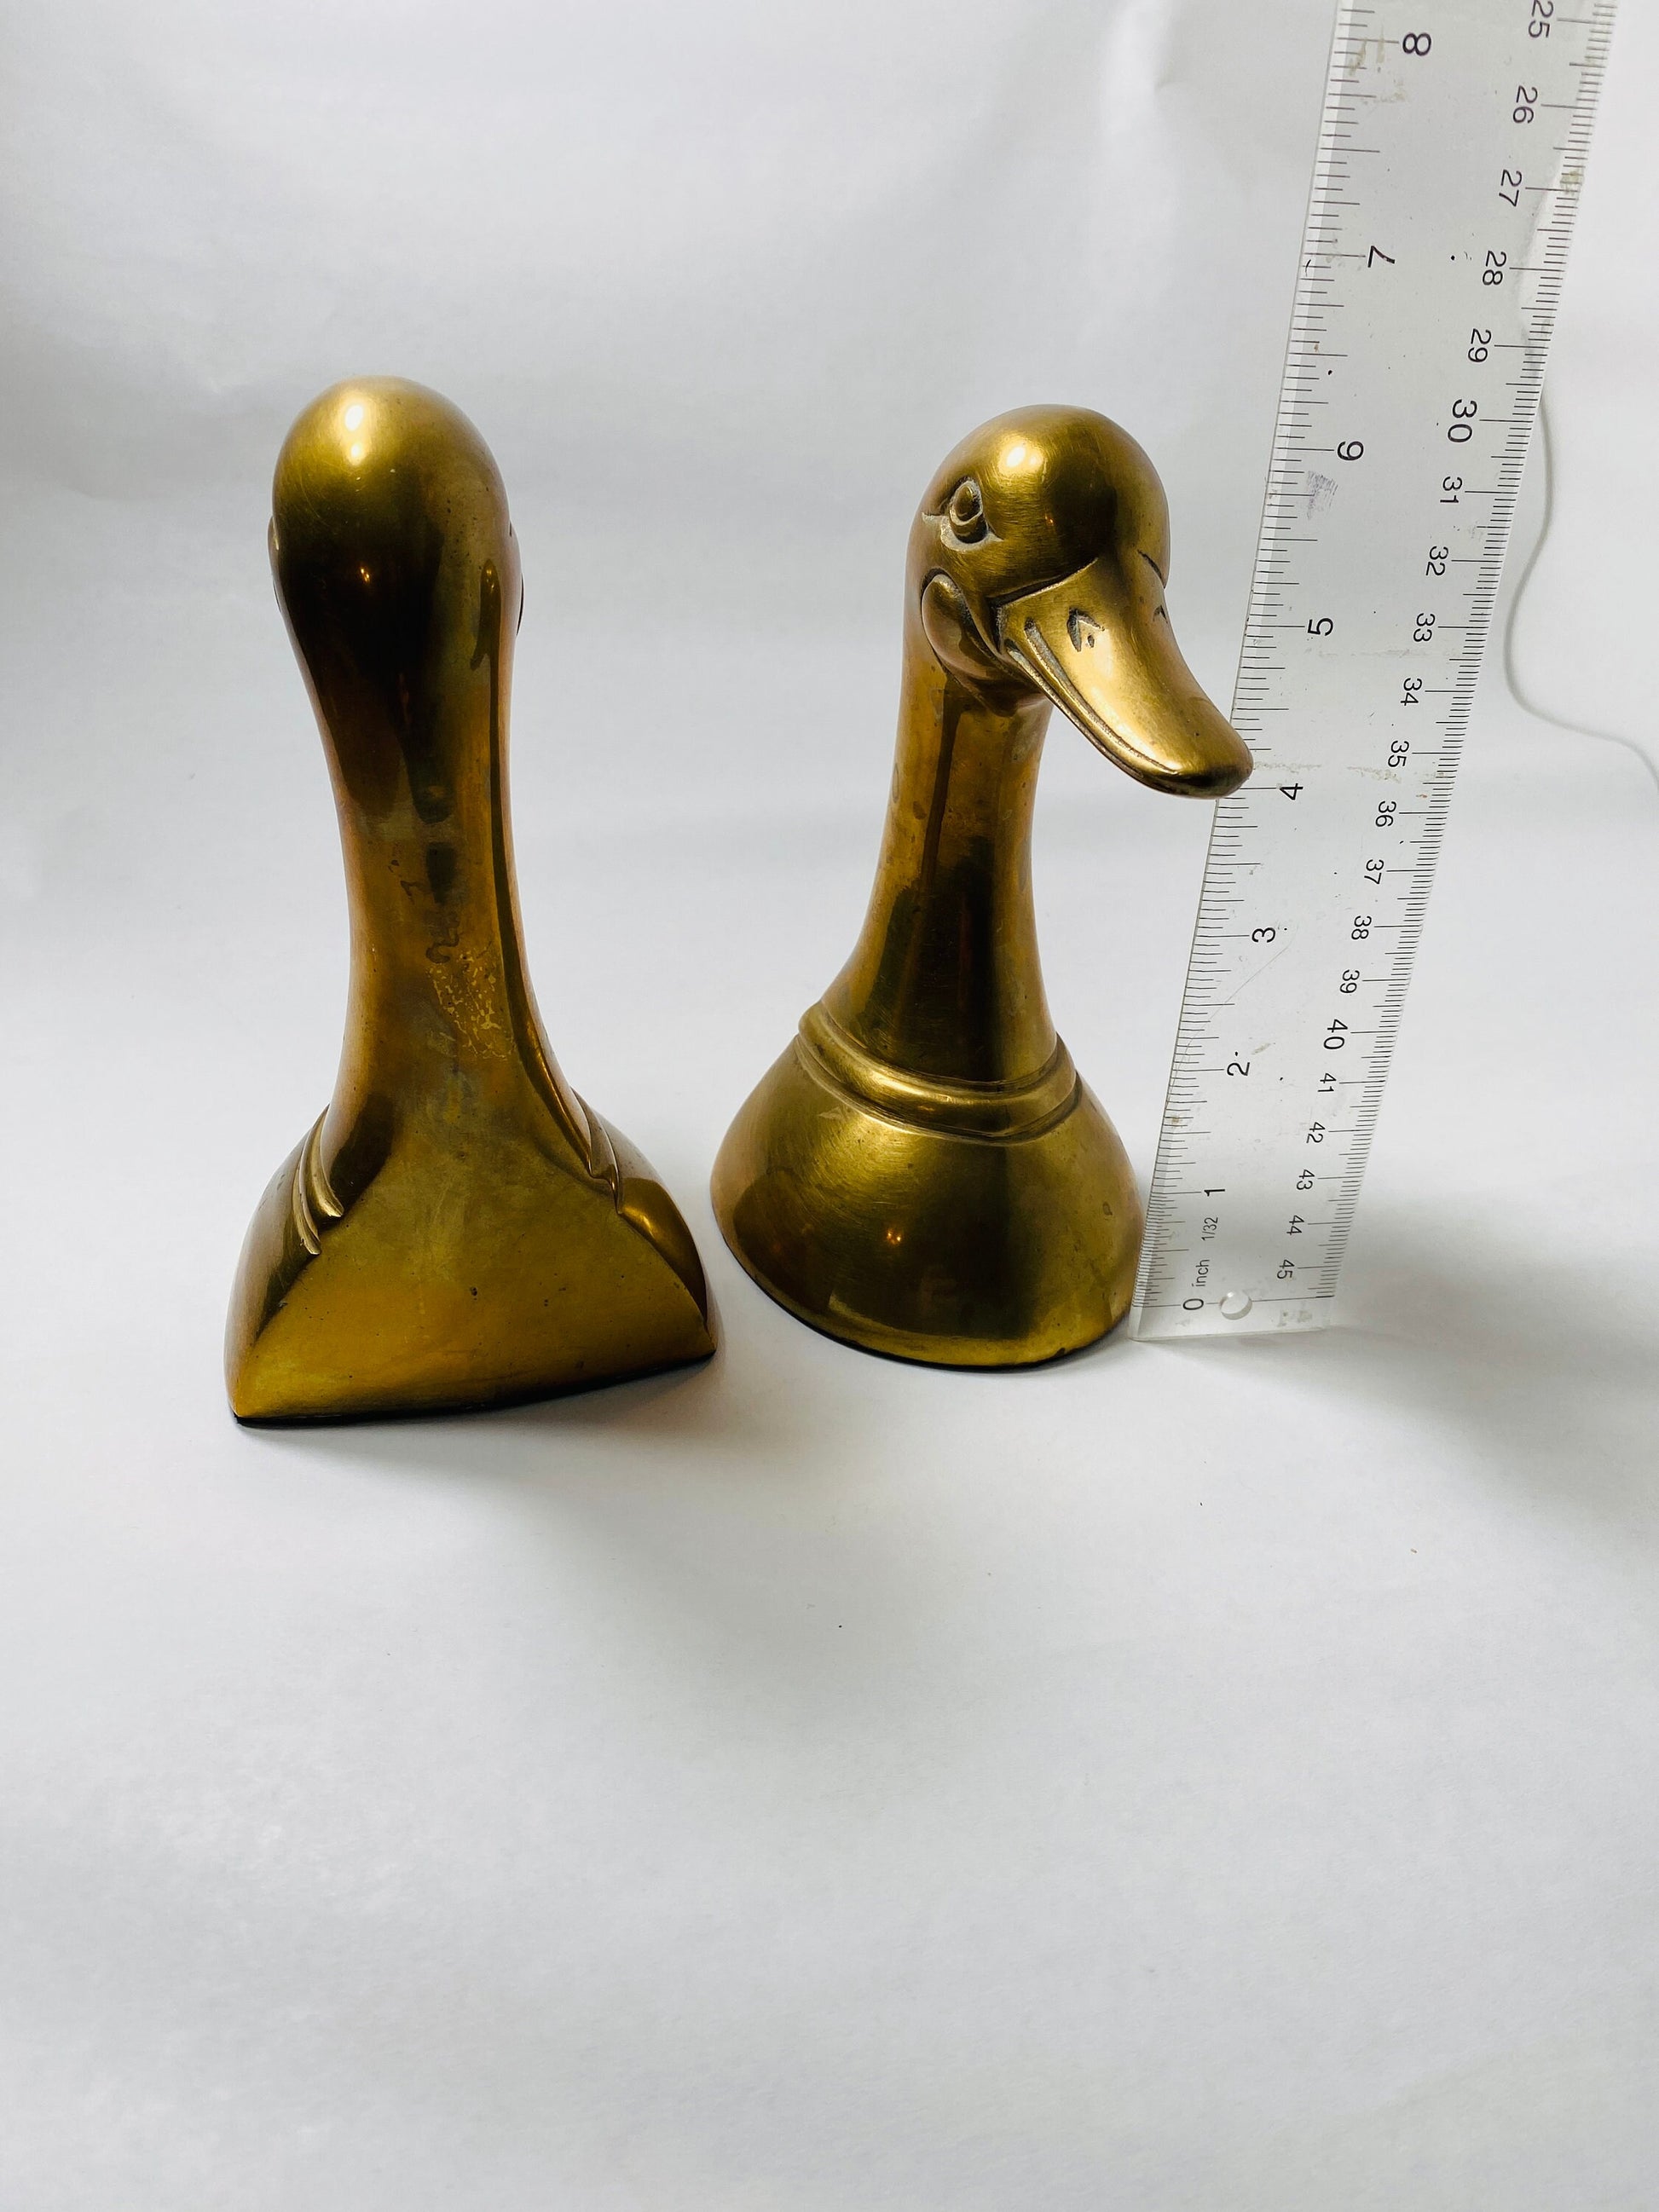 Mid-century brass pair of duck bookends circa 1950s Great gift for a library or office. Perfect for the sportsman! Elegant gold decor.